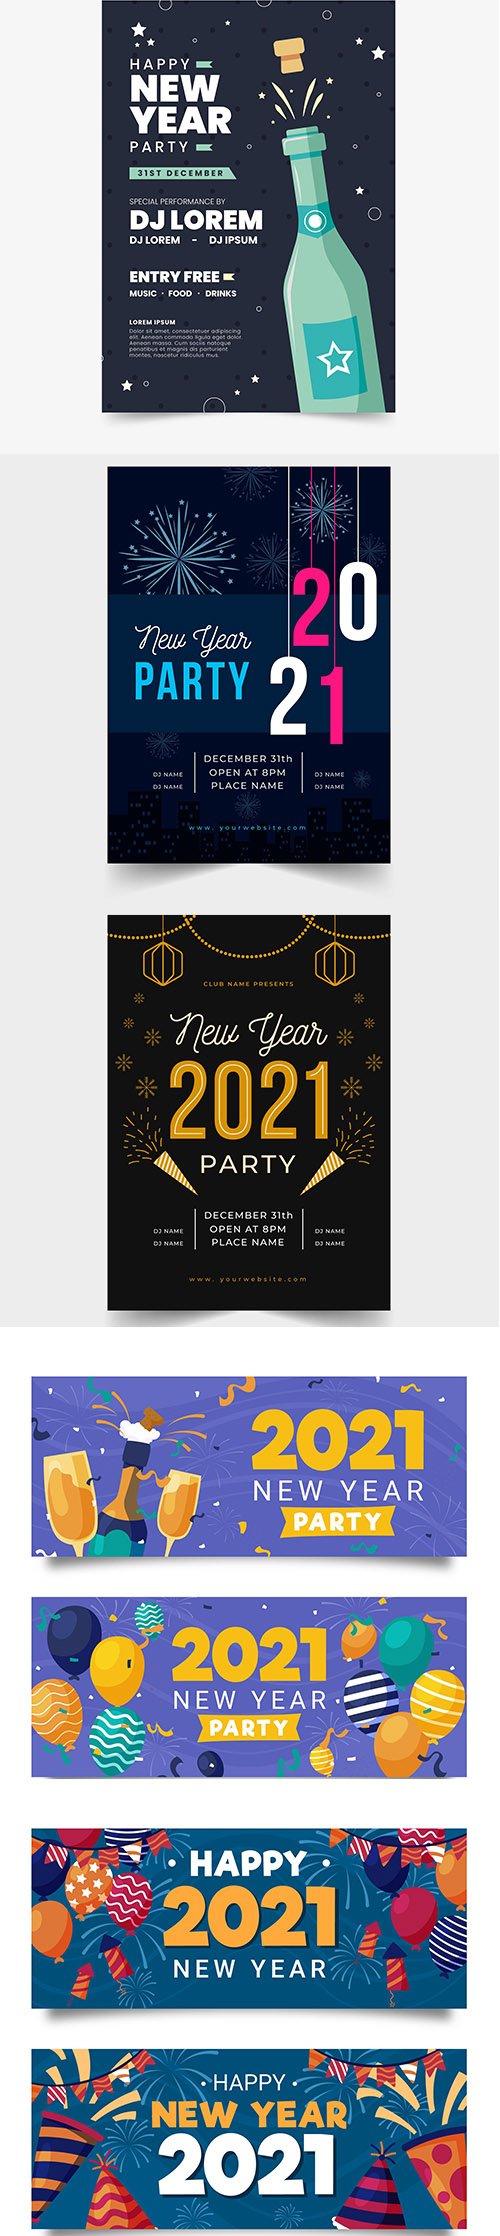 Hand-drawn new year party banners and poster template